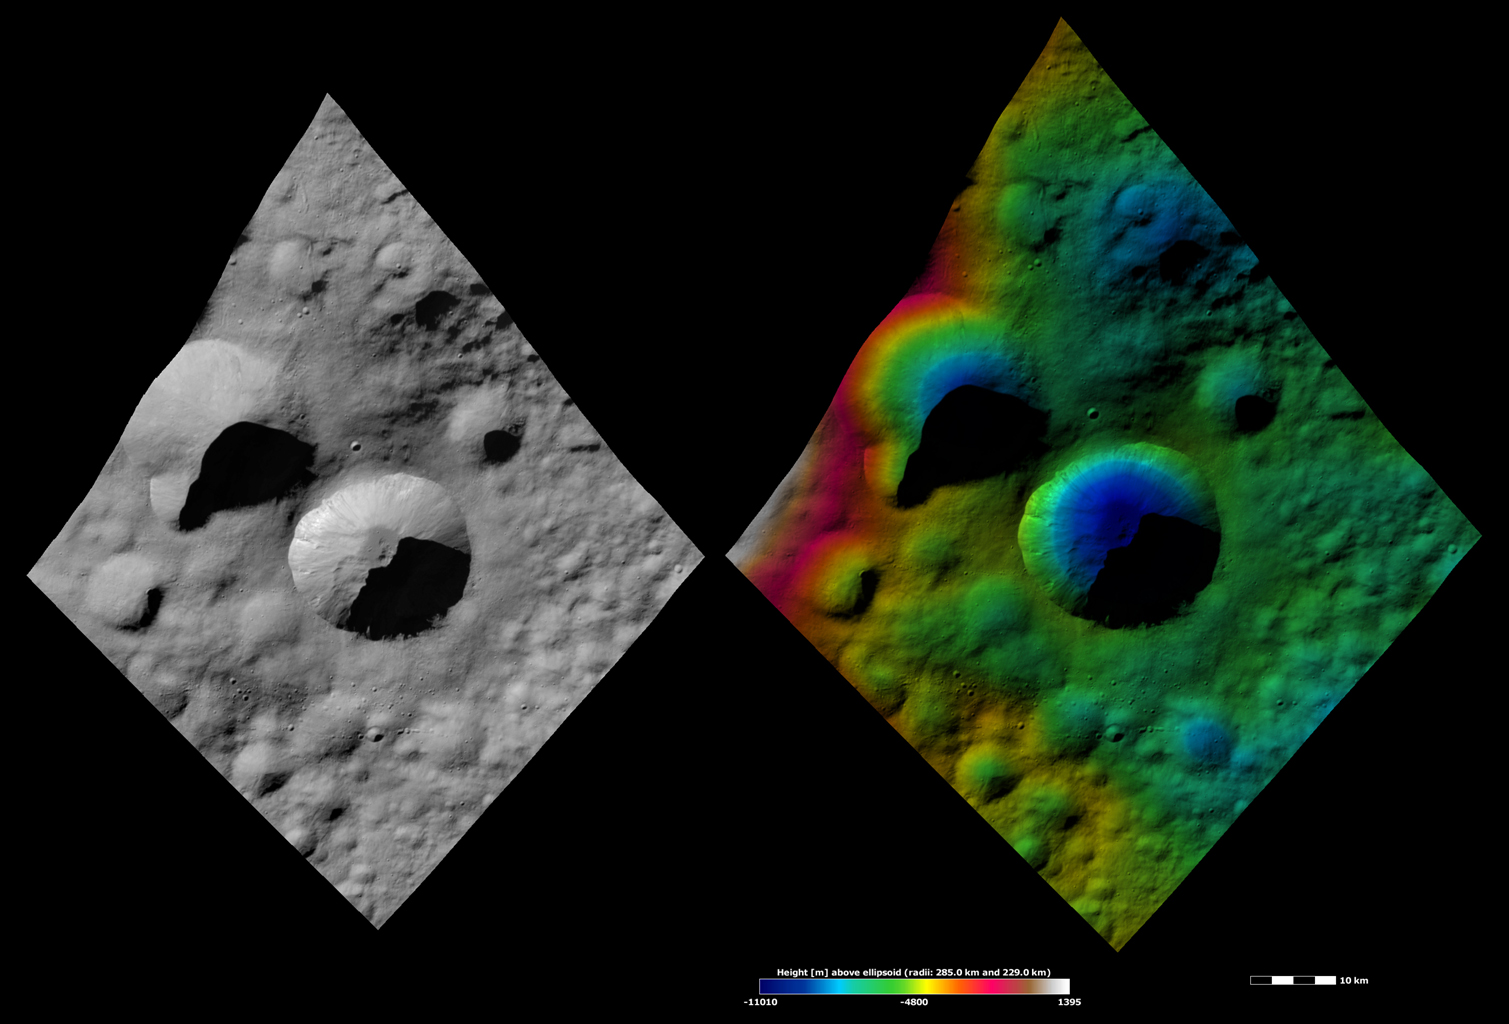 Apparent Brightness and Topography Images of Licinia Crater